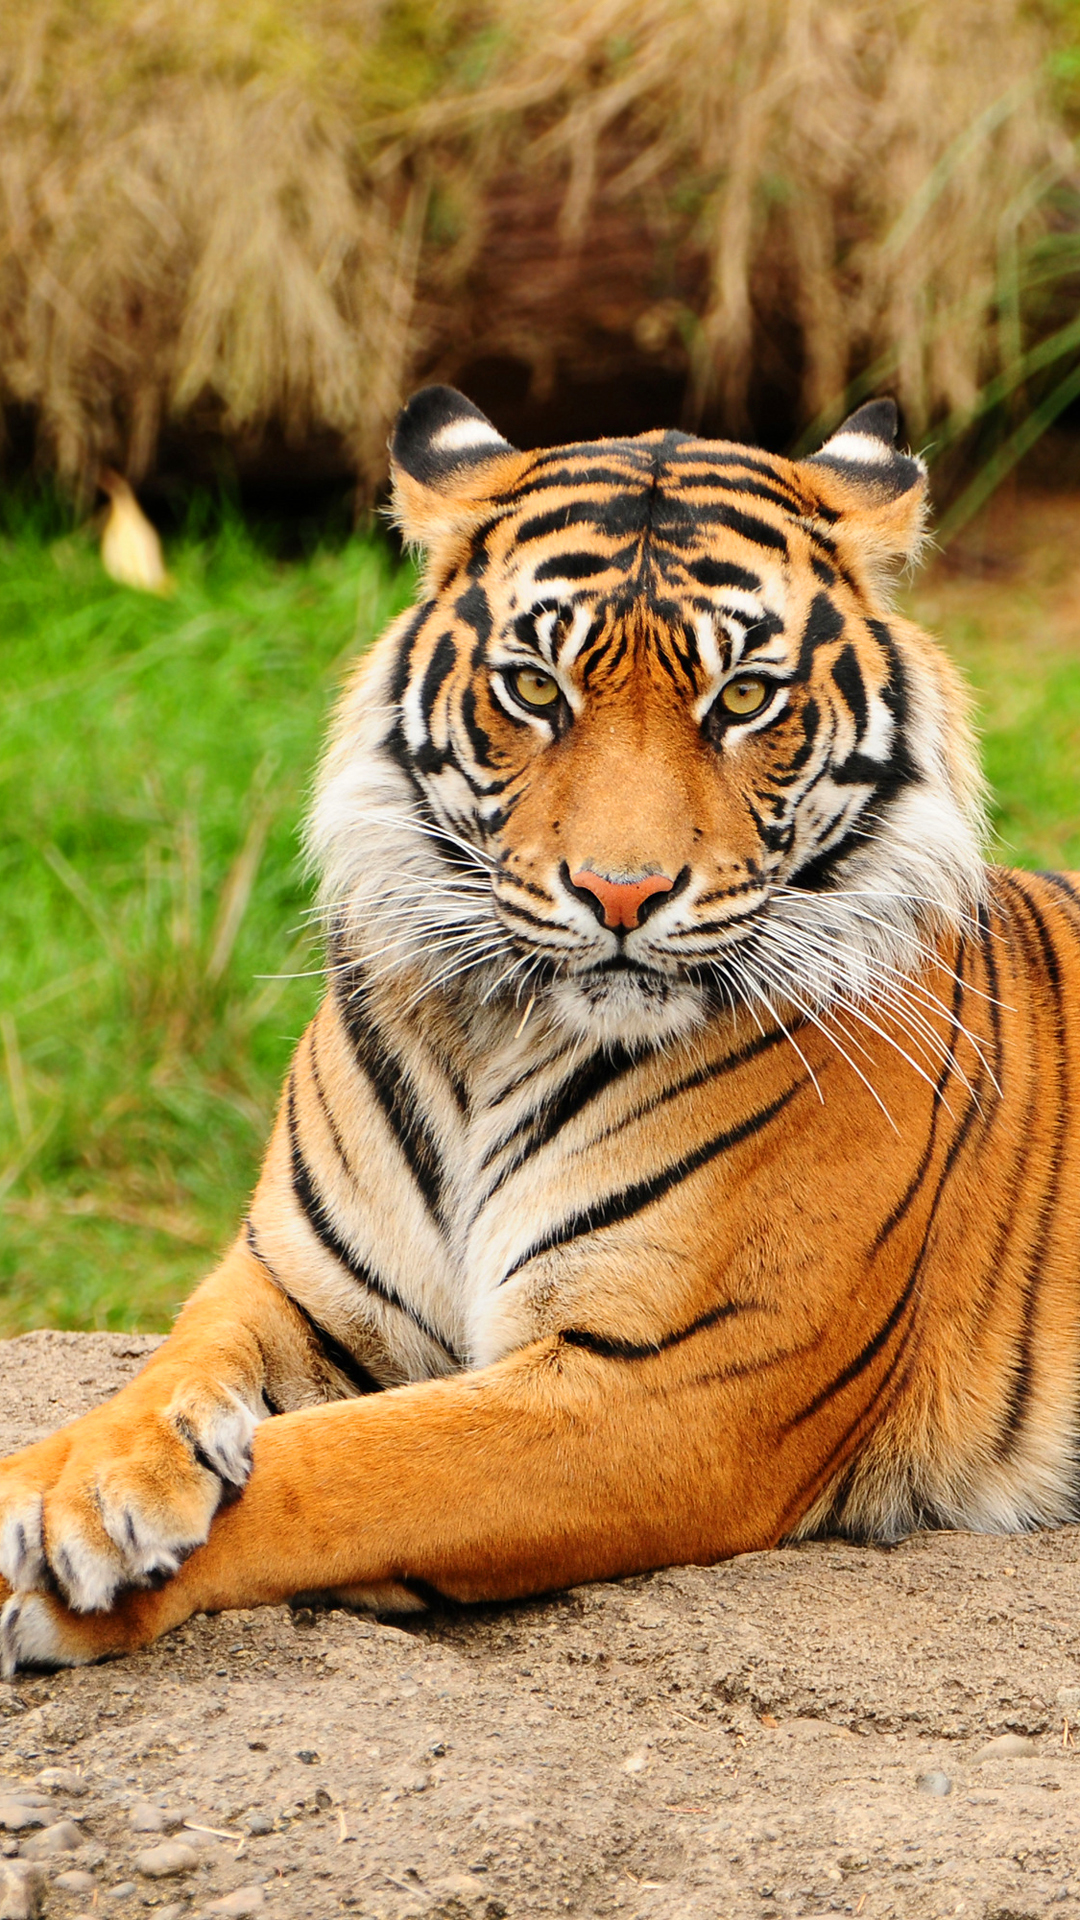 Tiger htc one wallpaper, free and easy to download